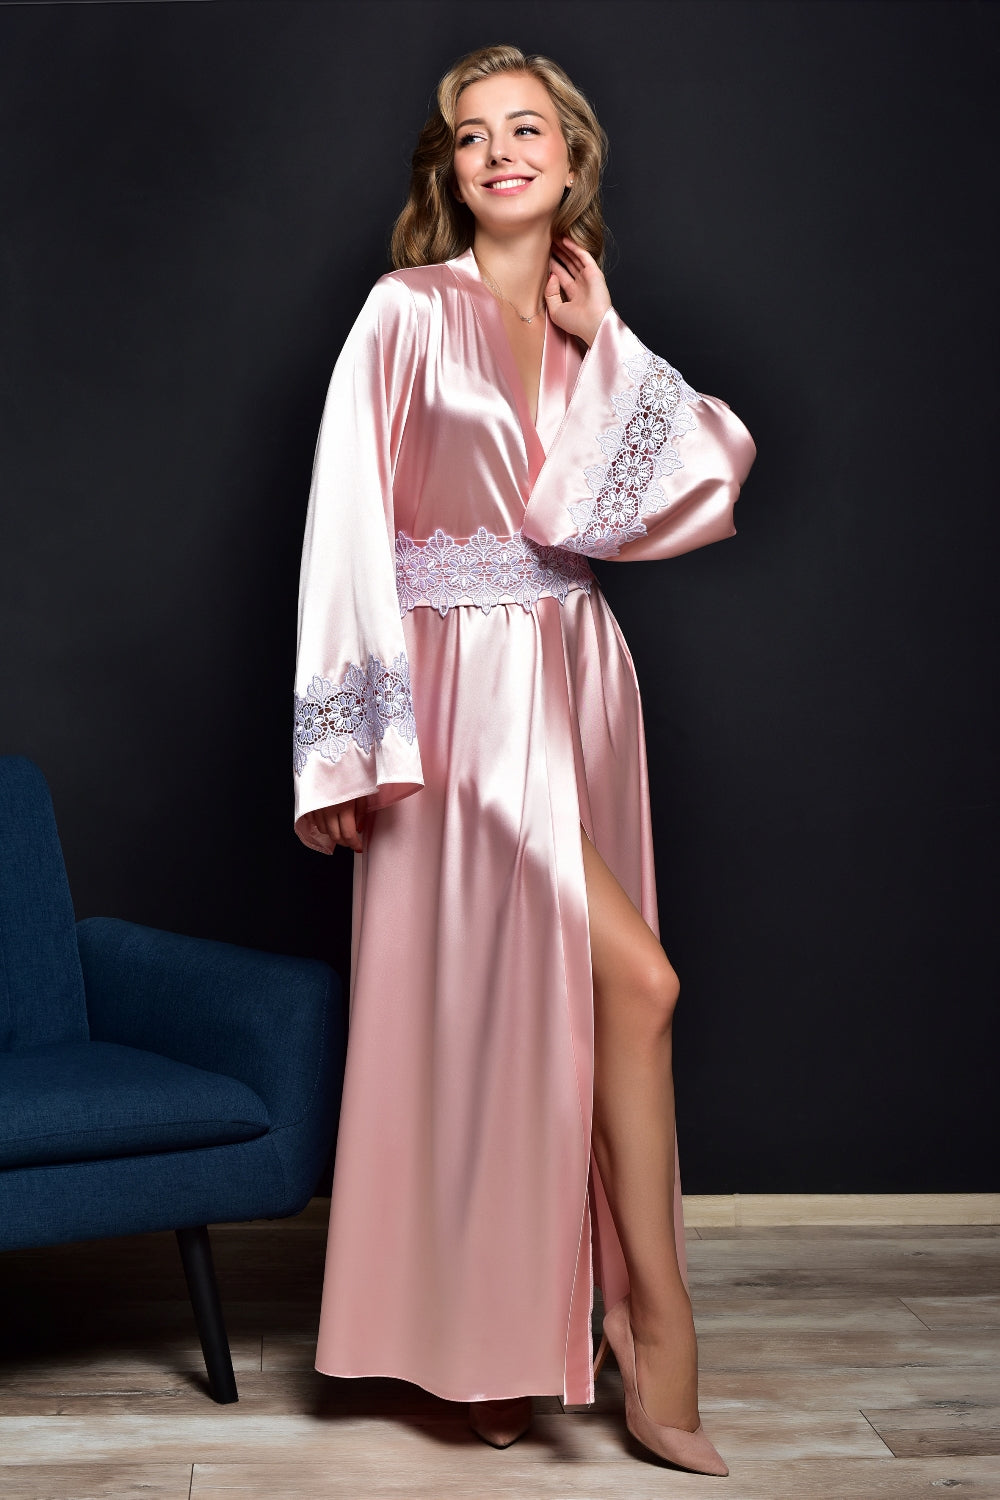 Image of Pink Satin Maxi Robe with Venise Lace Trim